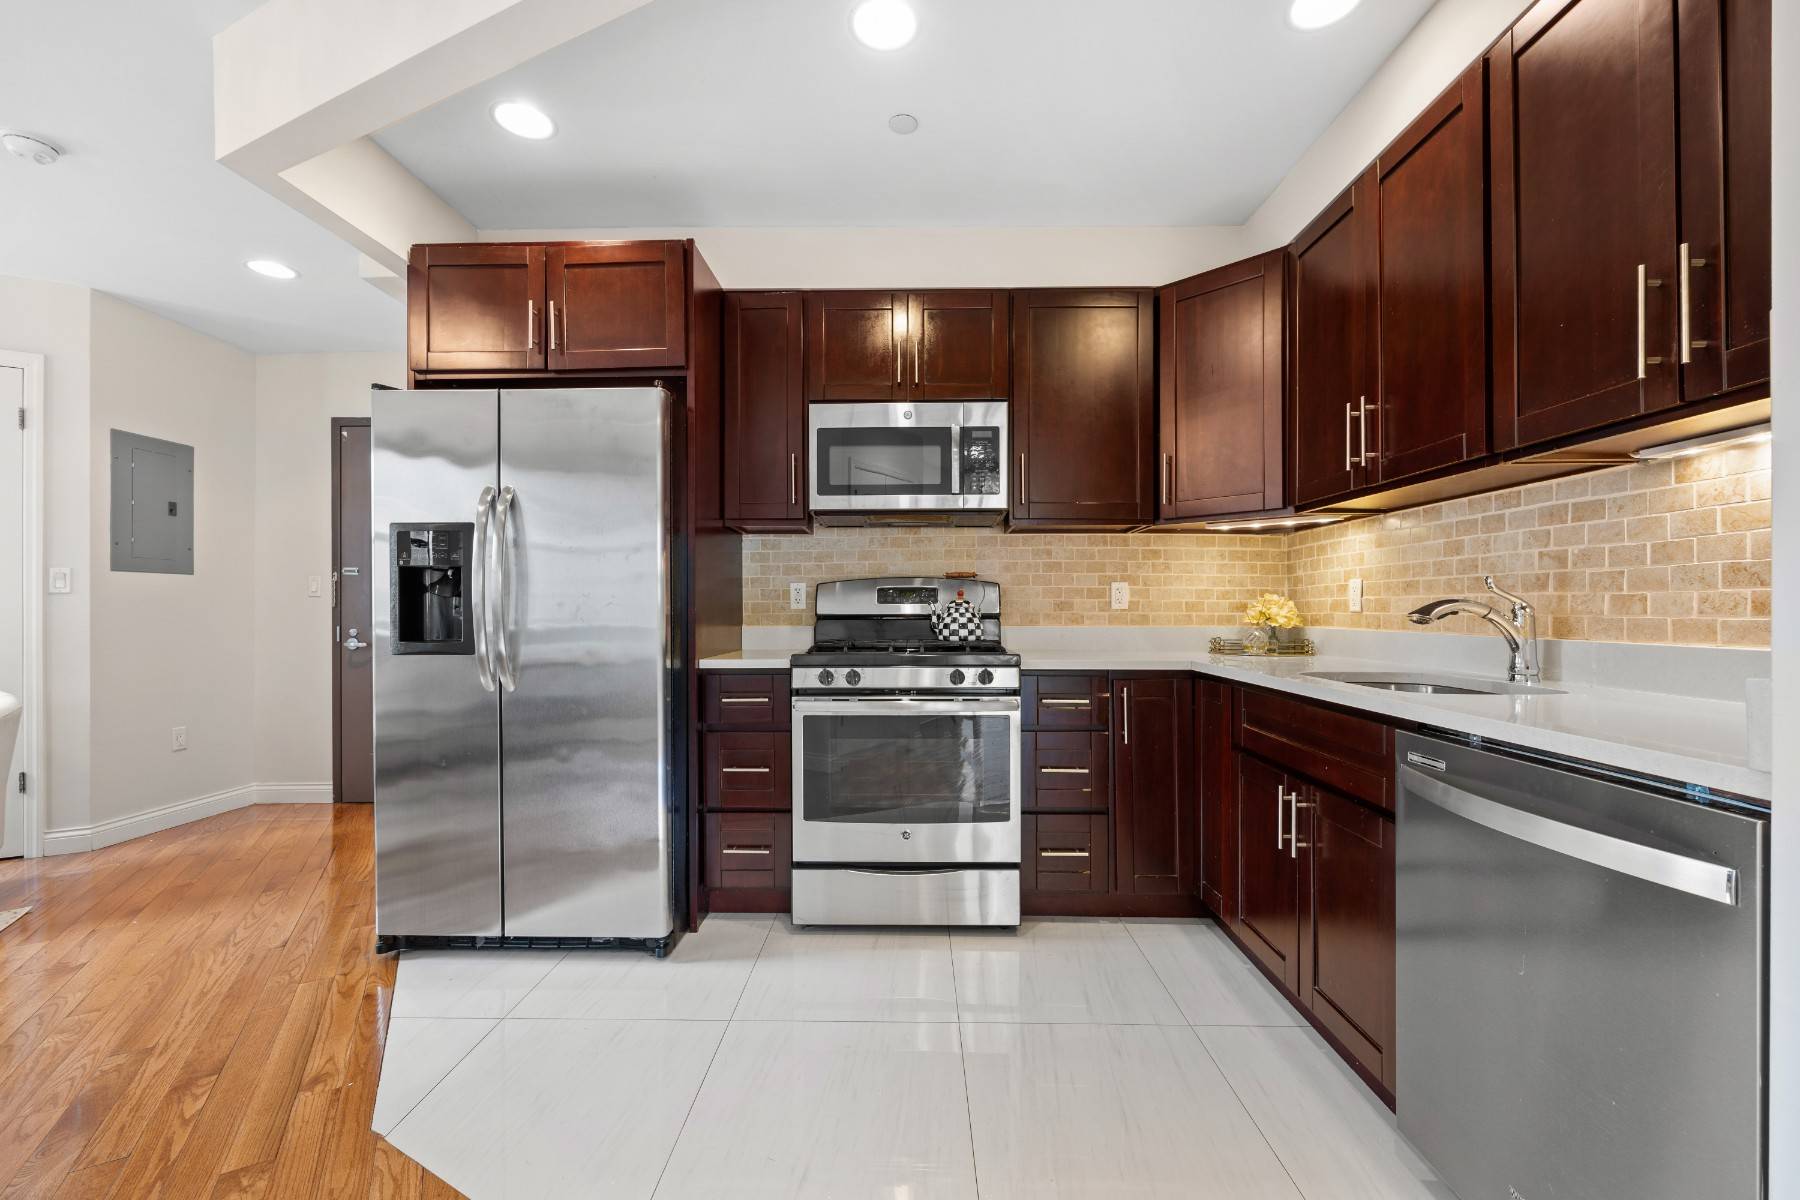 Welcome to this exquisite 2 bedroom, 2 bathroom condo at Edgecombe Parc in Washington Heights.